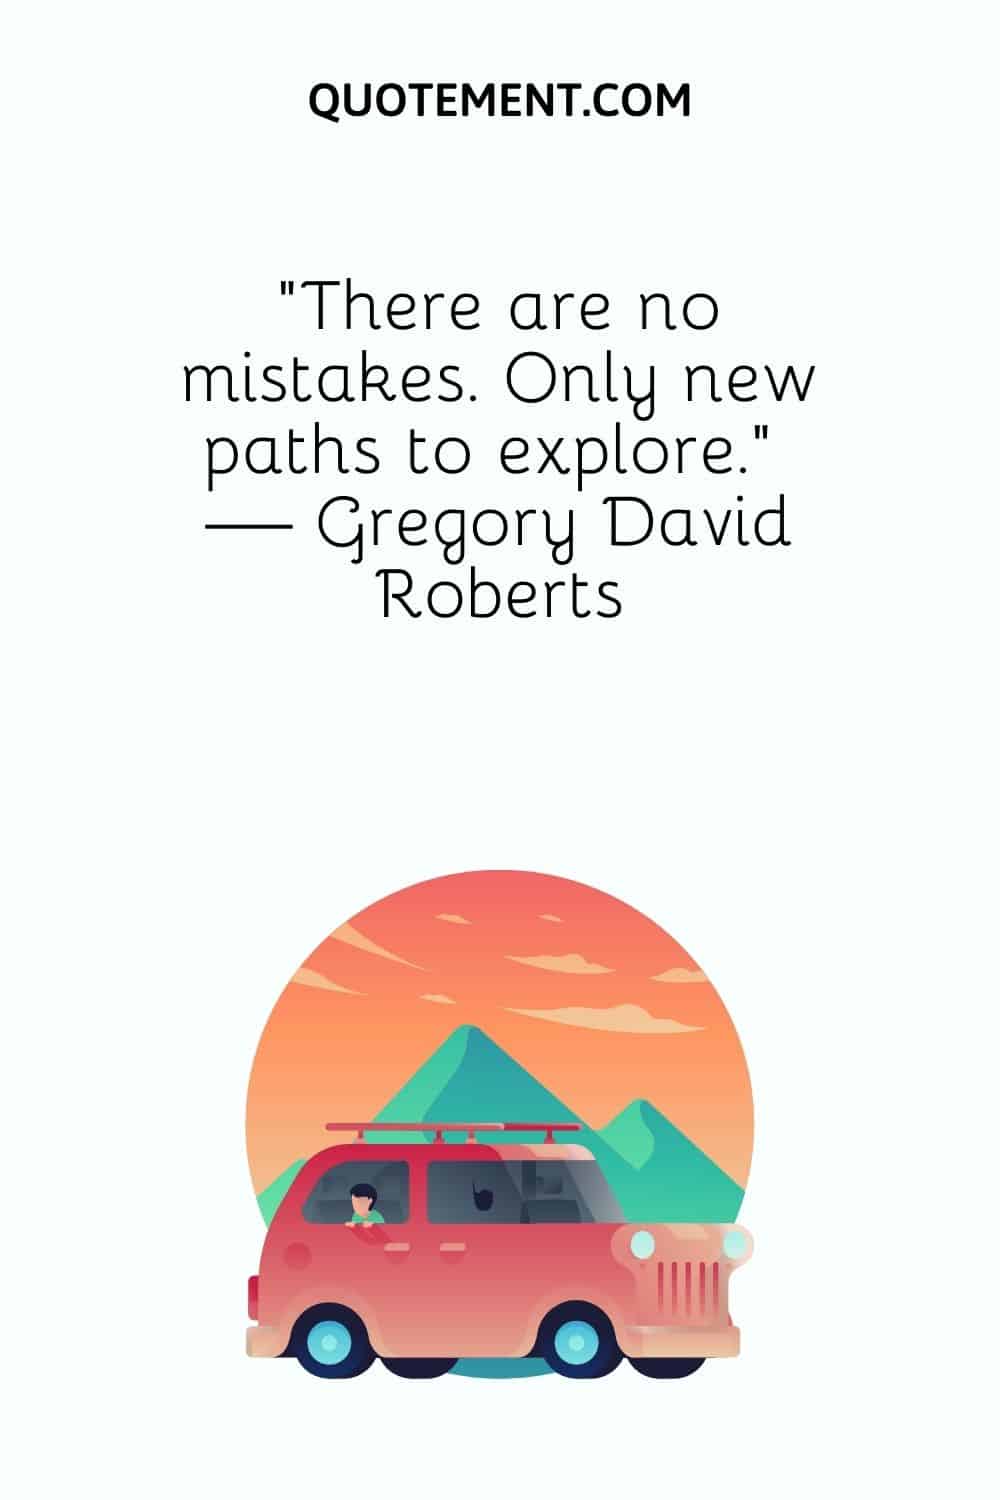 There are no mistakes. Only new paths to explore